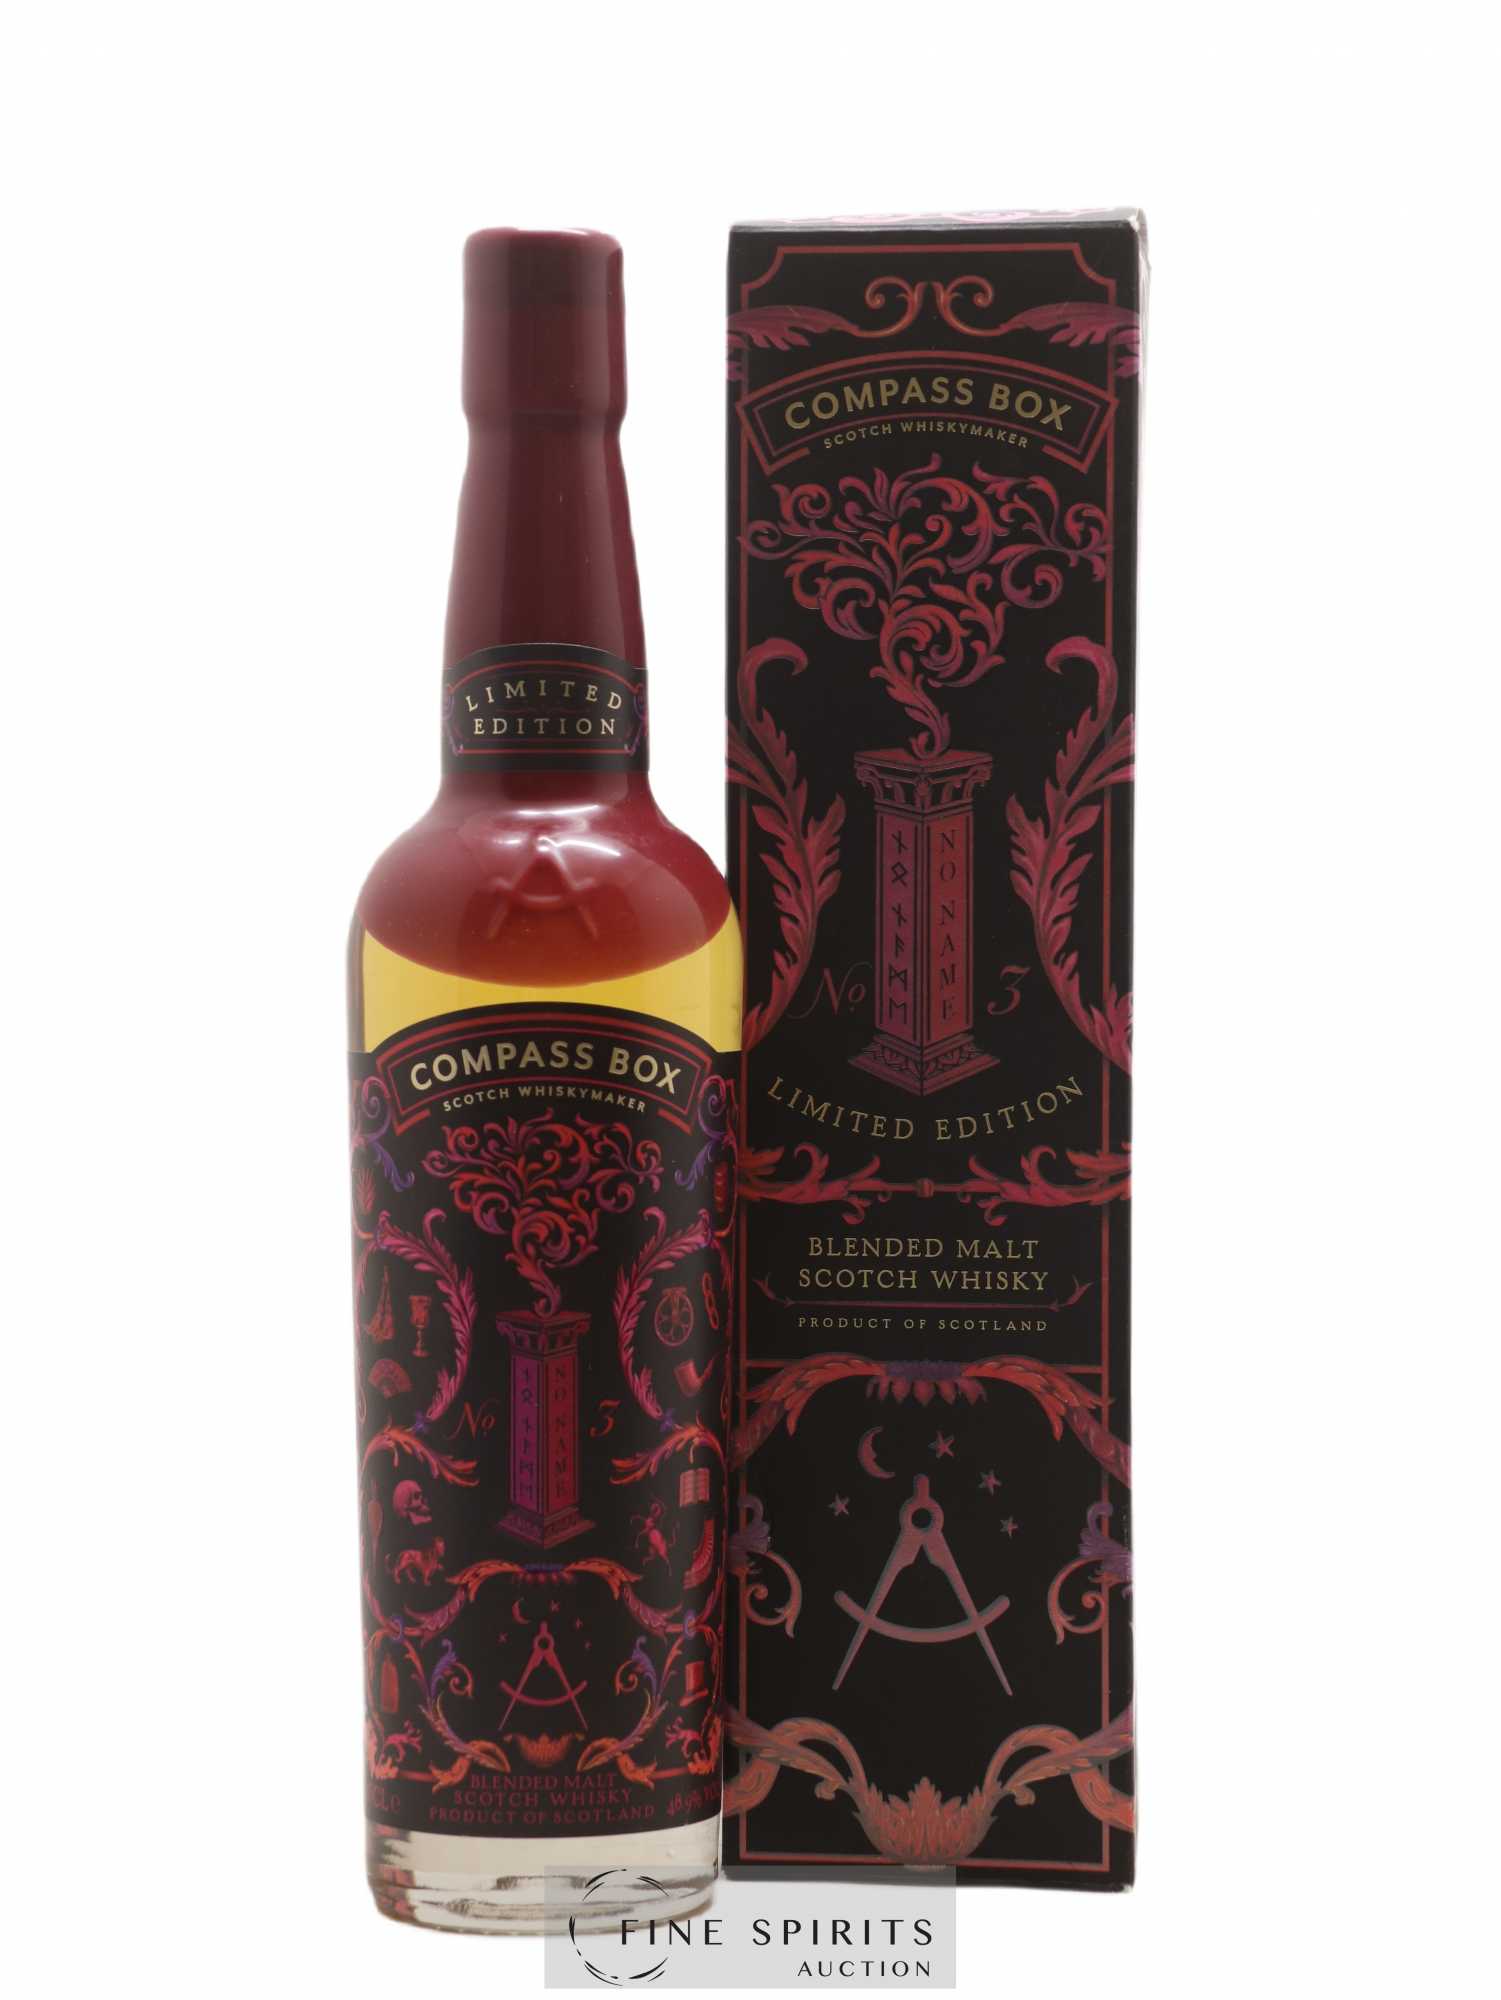 No Name n°3 Compass Box One of 10794 - bottled 2021 Limited Edition 